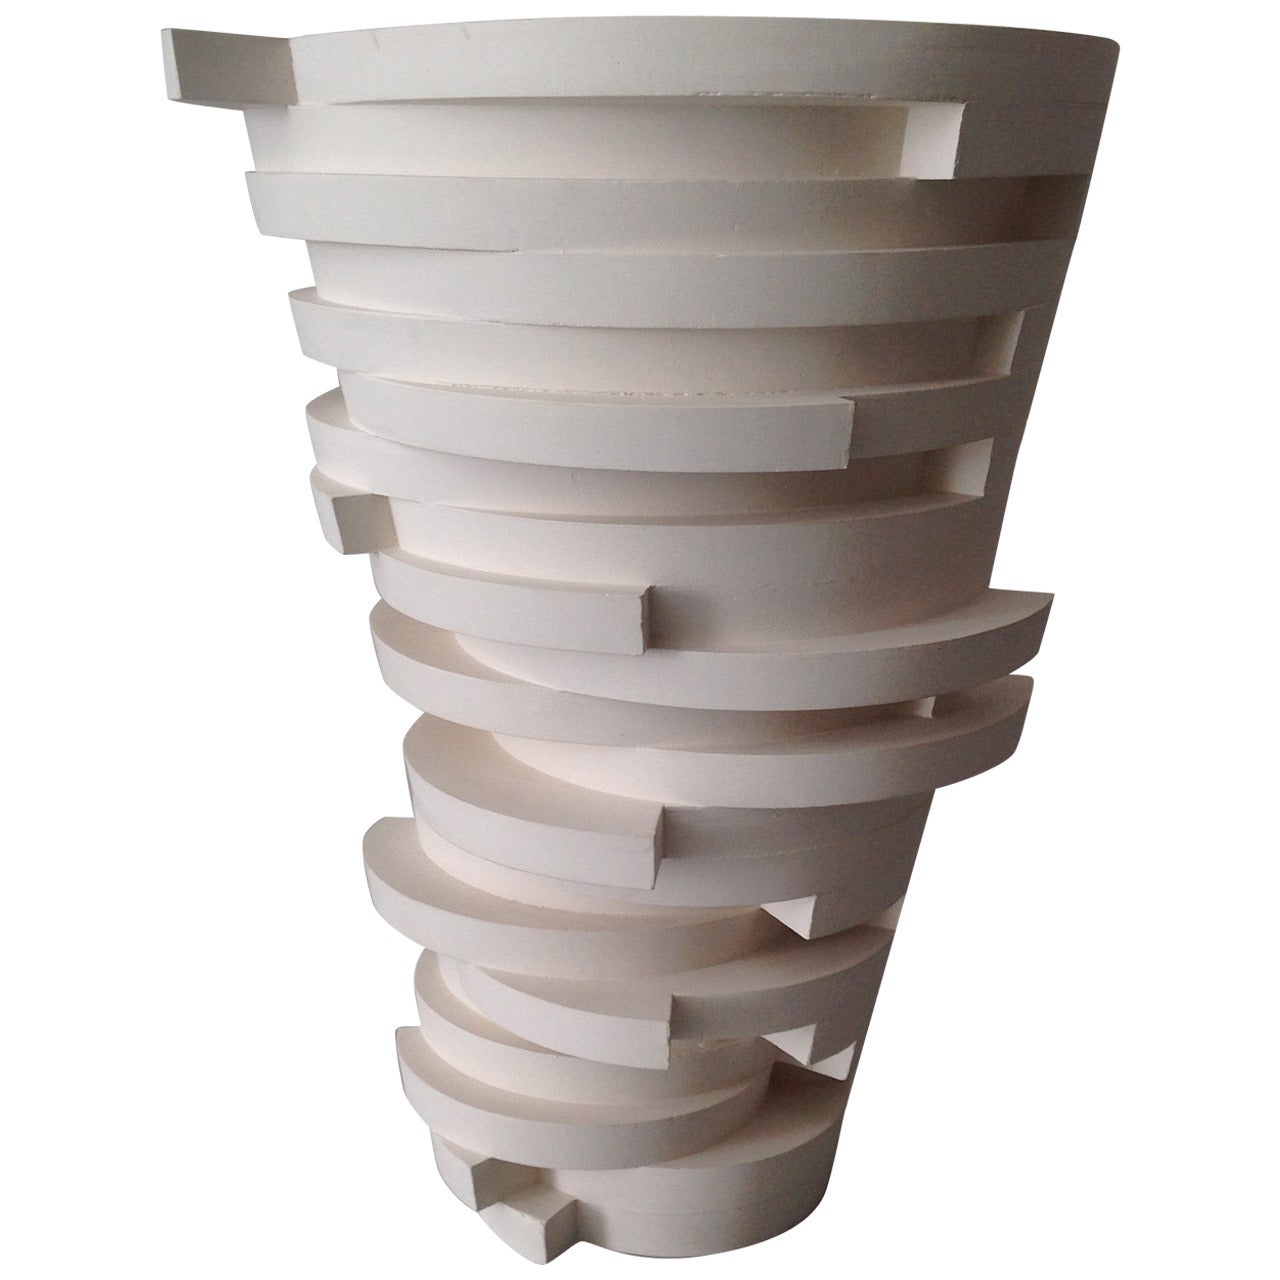 Deconstructed Ceramic Vase by Ronald Meulman For Sale